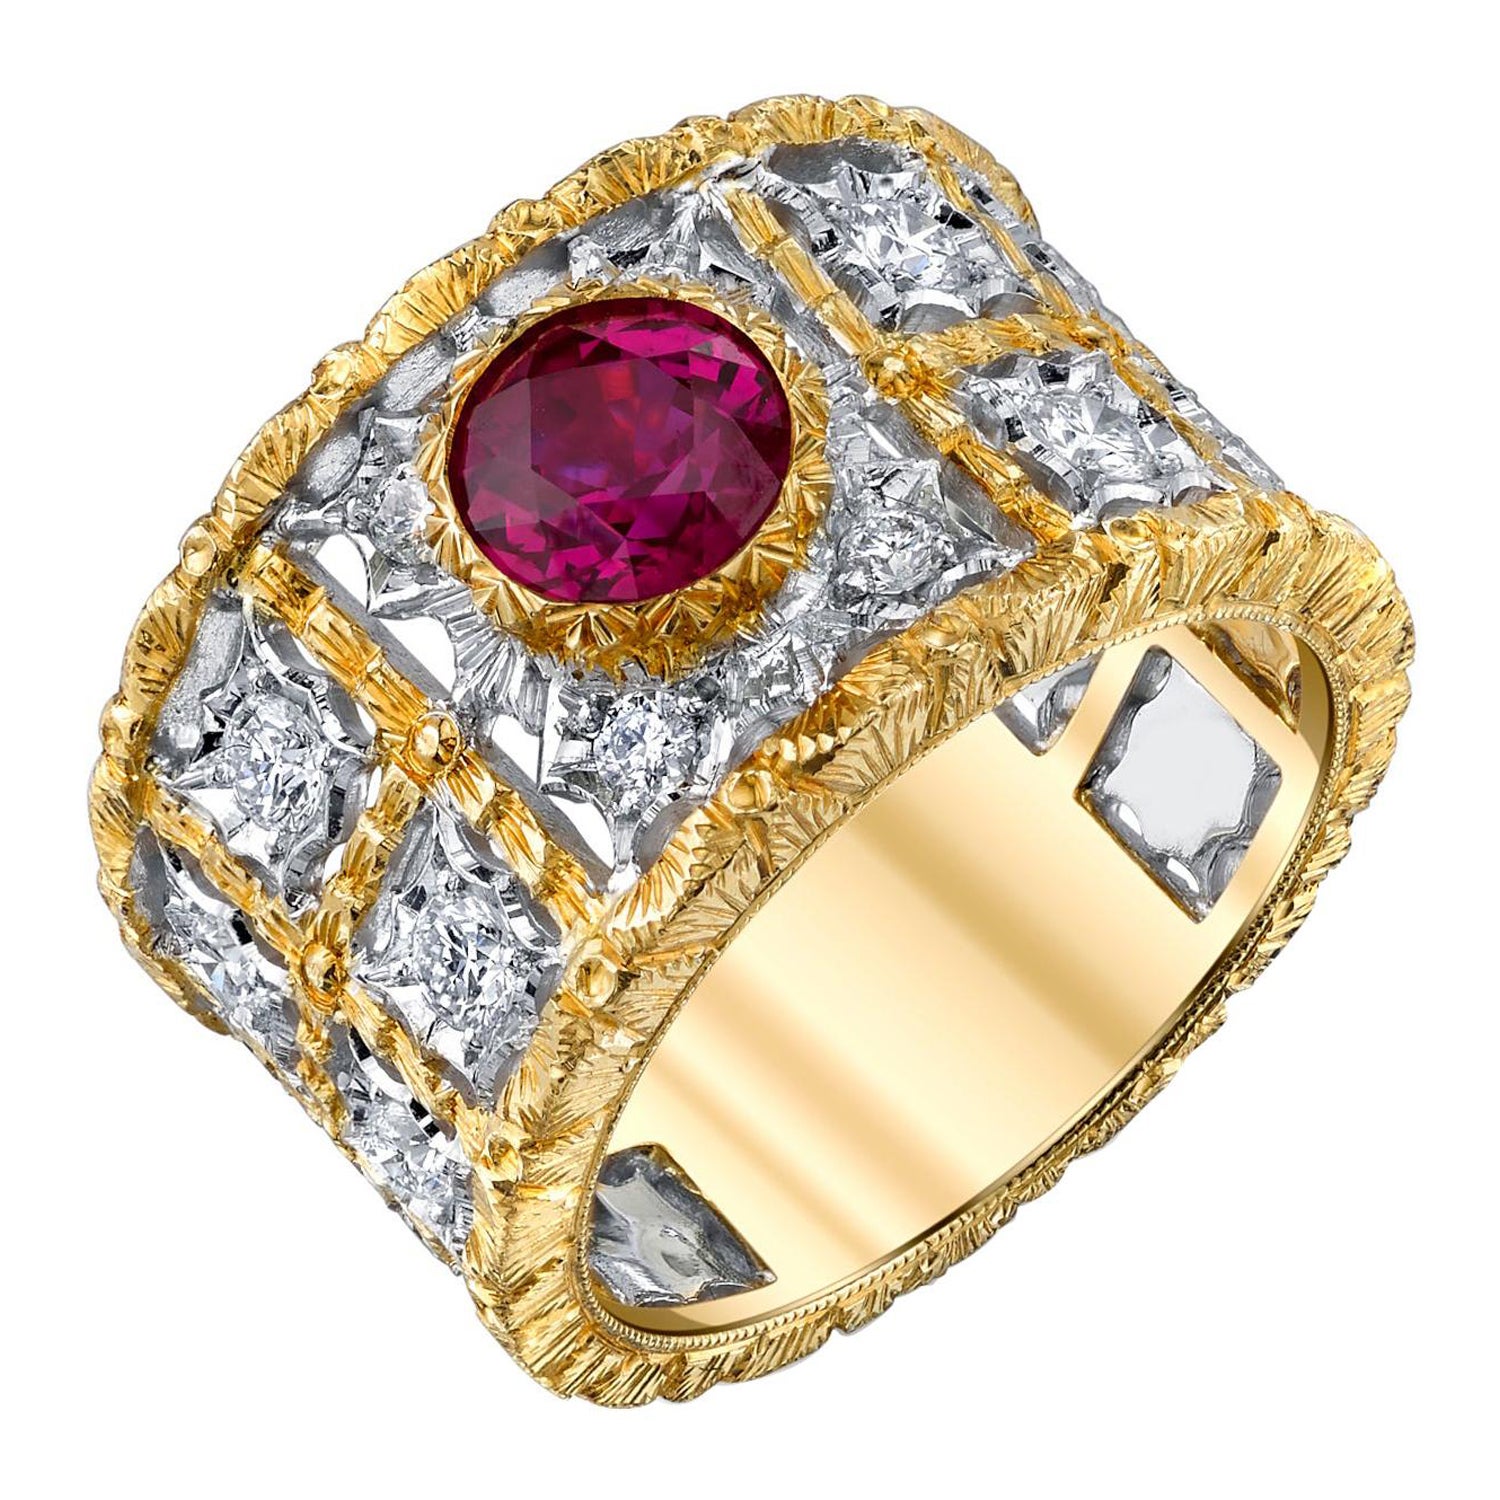 1.68 Carat Ruby and Diamond Florentine Style Band Ring in White and Yellow Gold 